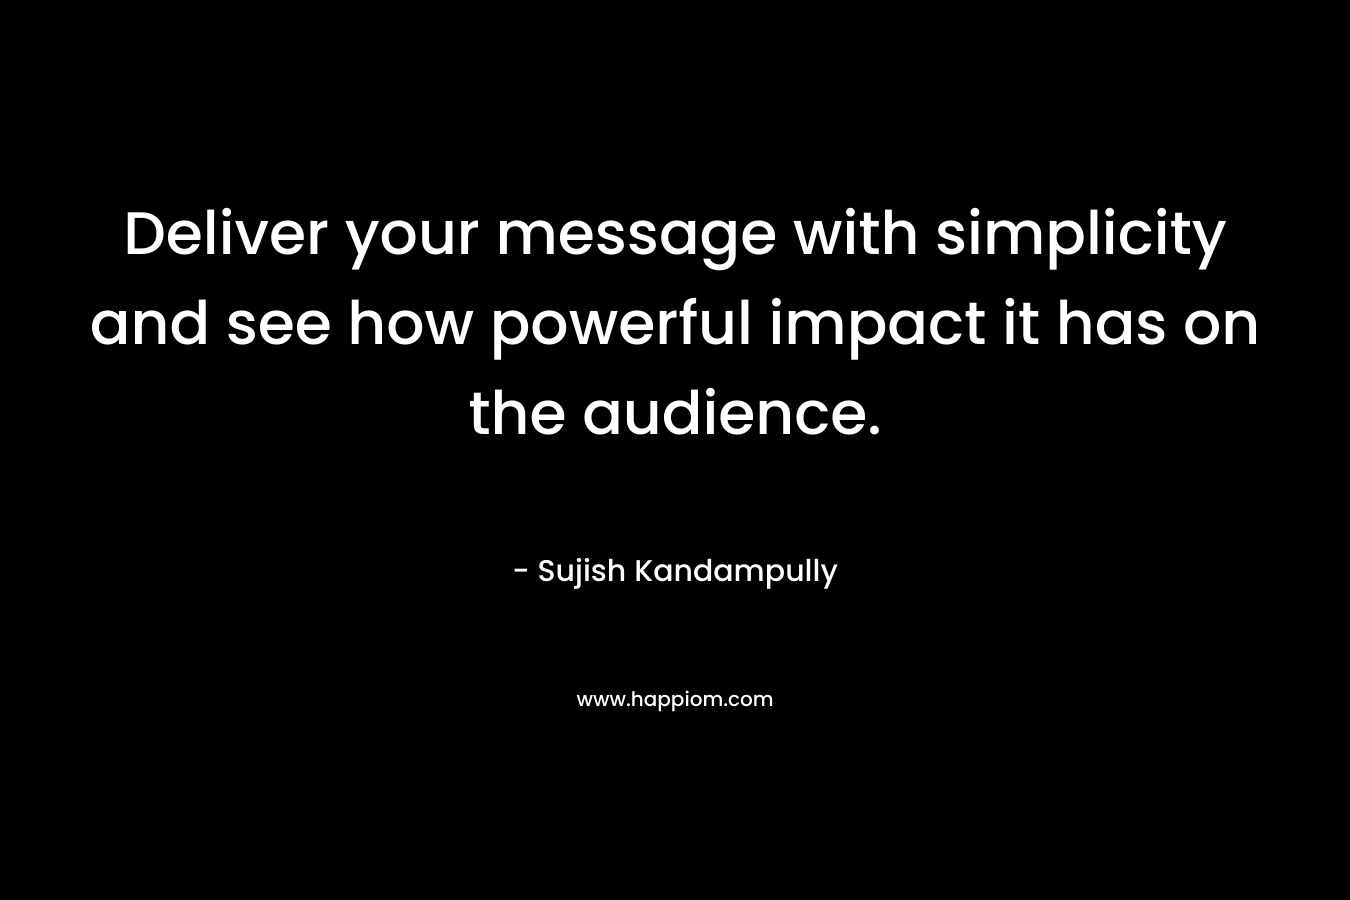 Deliver your message with simplicity and see how powerful impact it has on the audience. – Sujish Kandampully